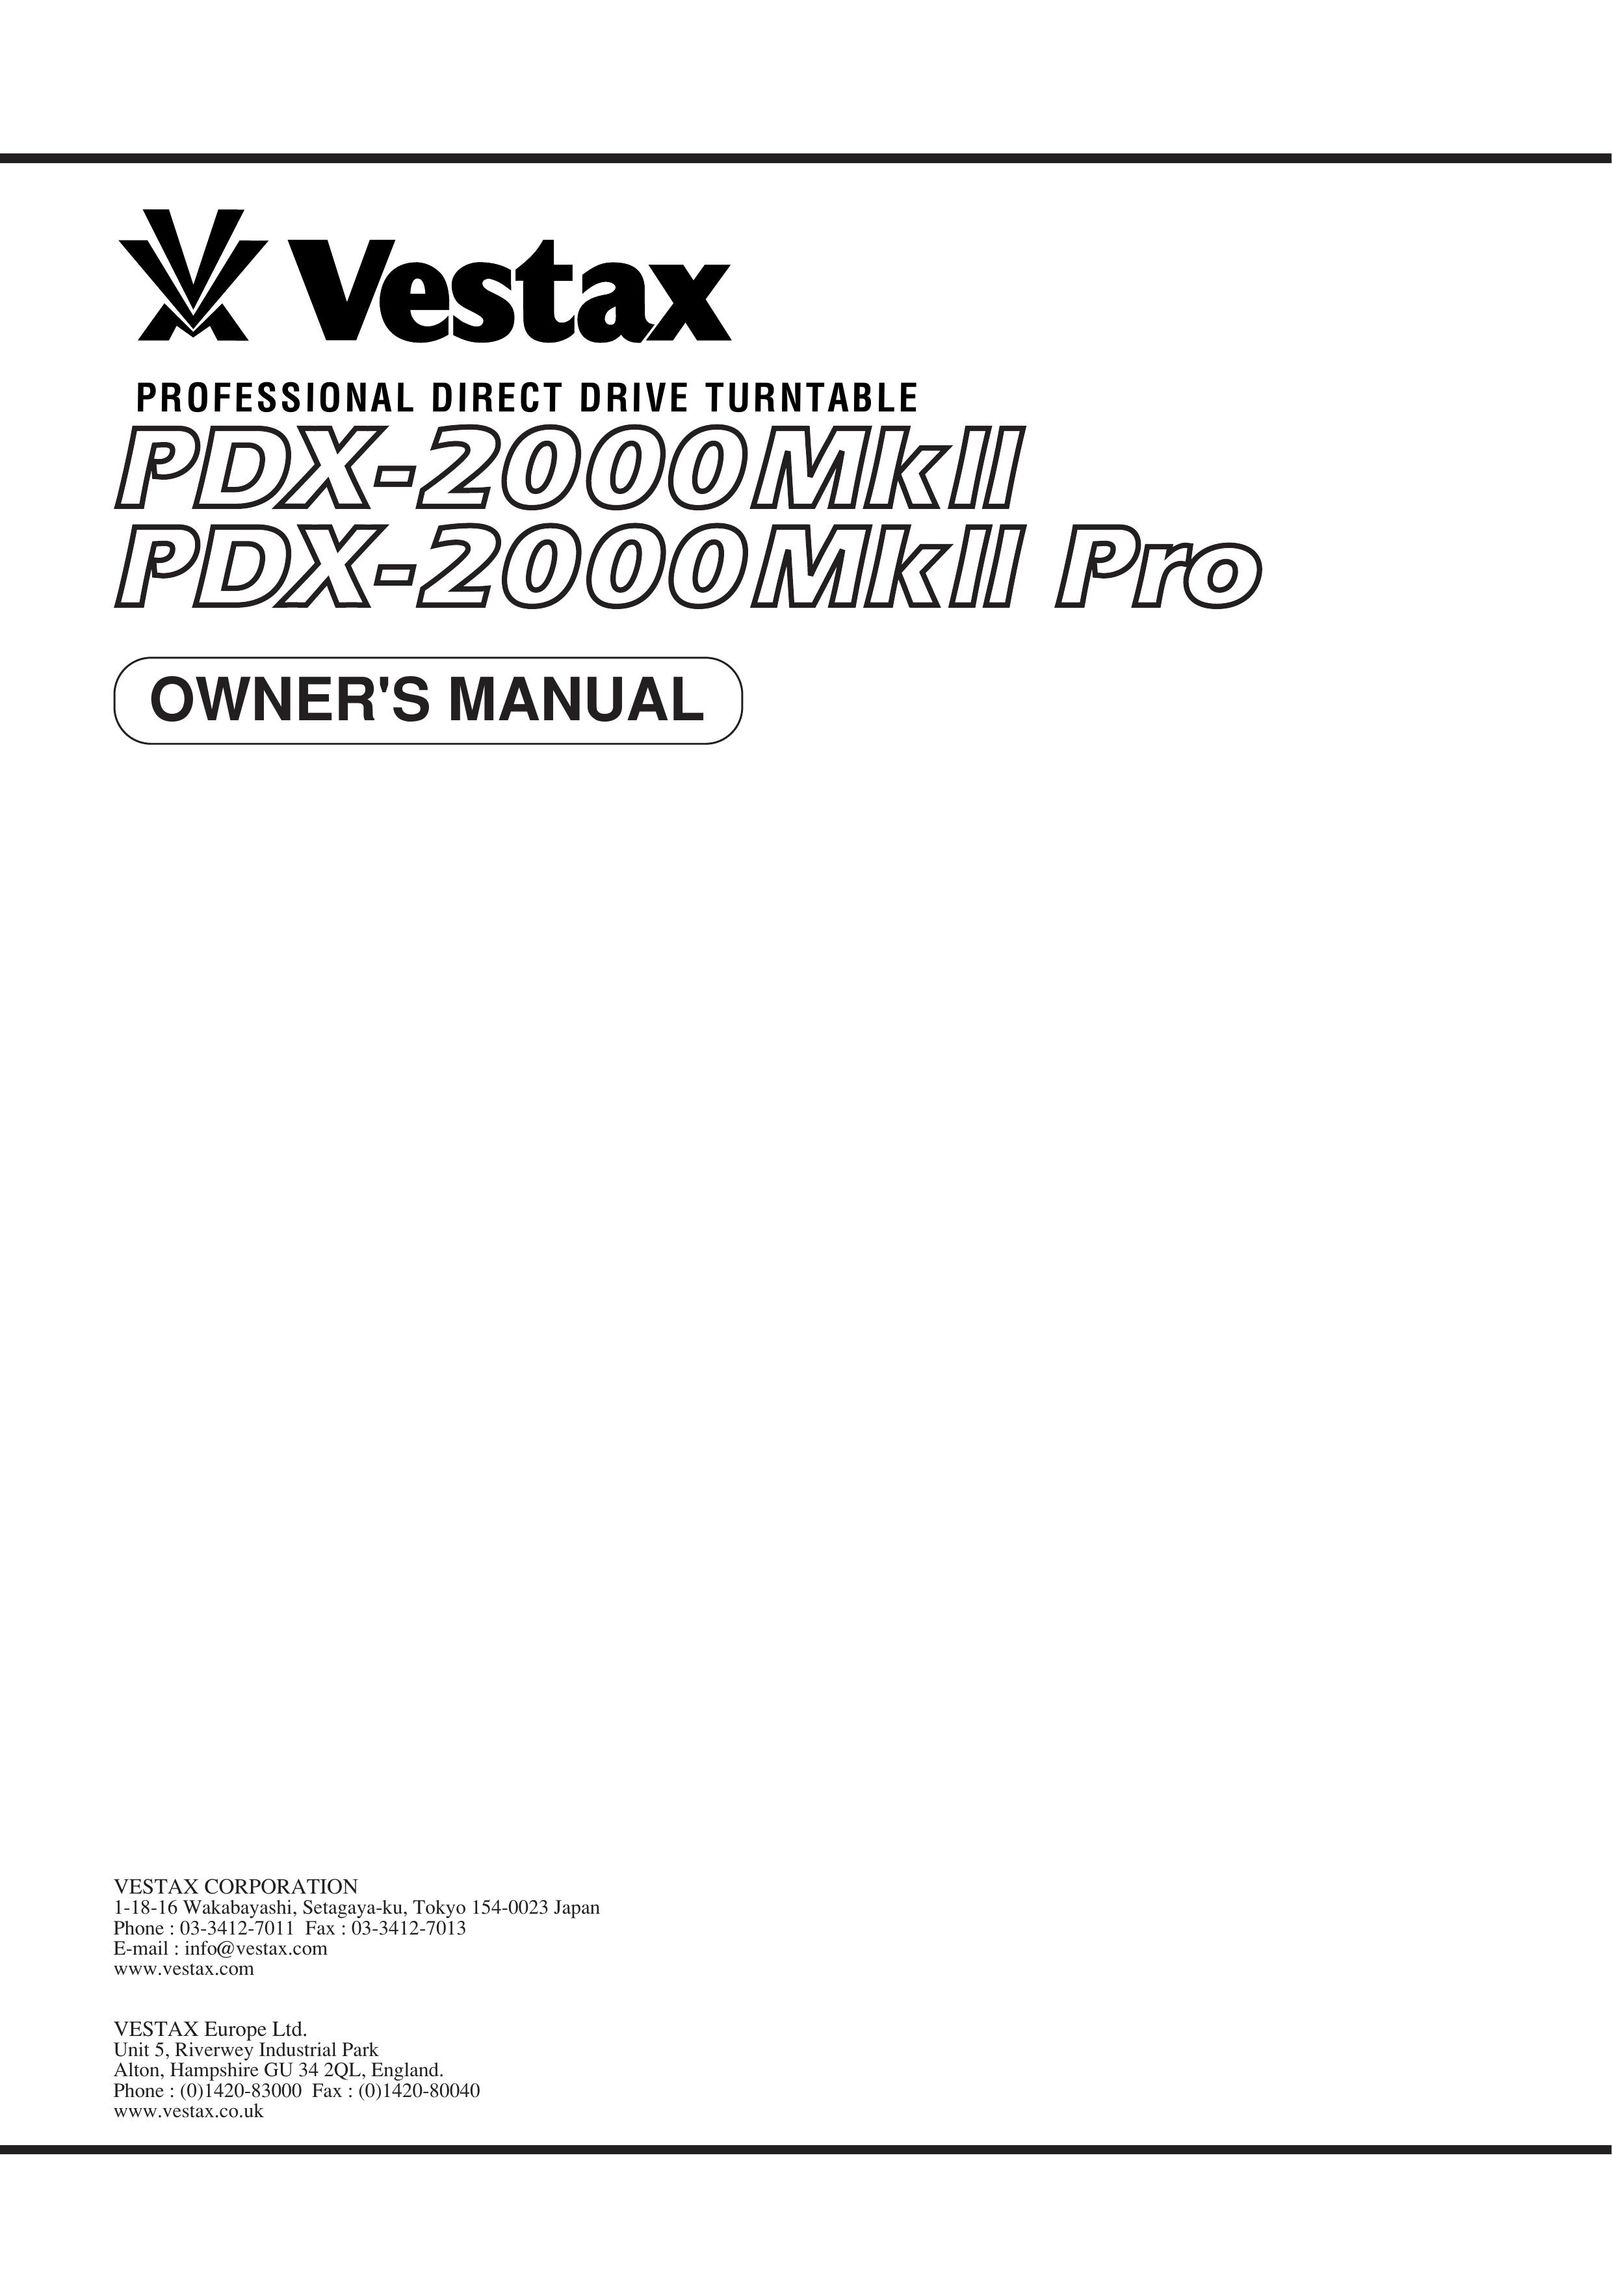 Vestax PDX-2000MkII, PDX-2000MkII Pro Turntable User Manual